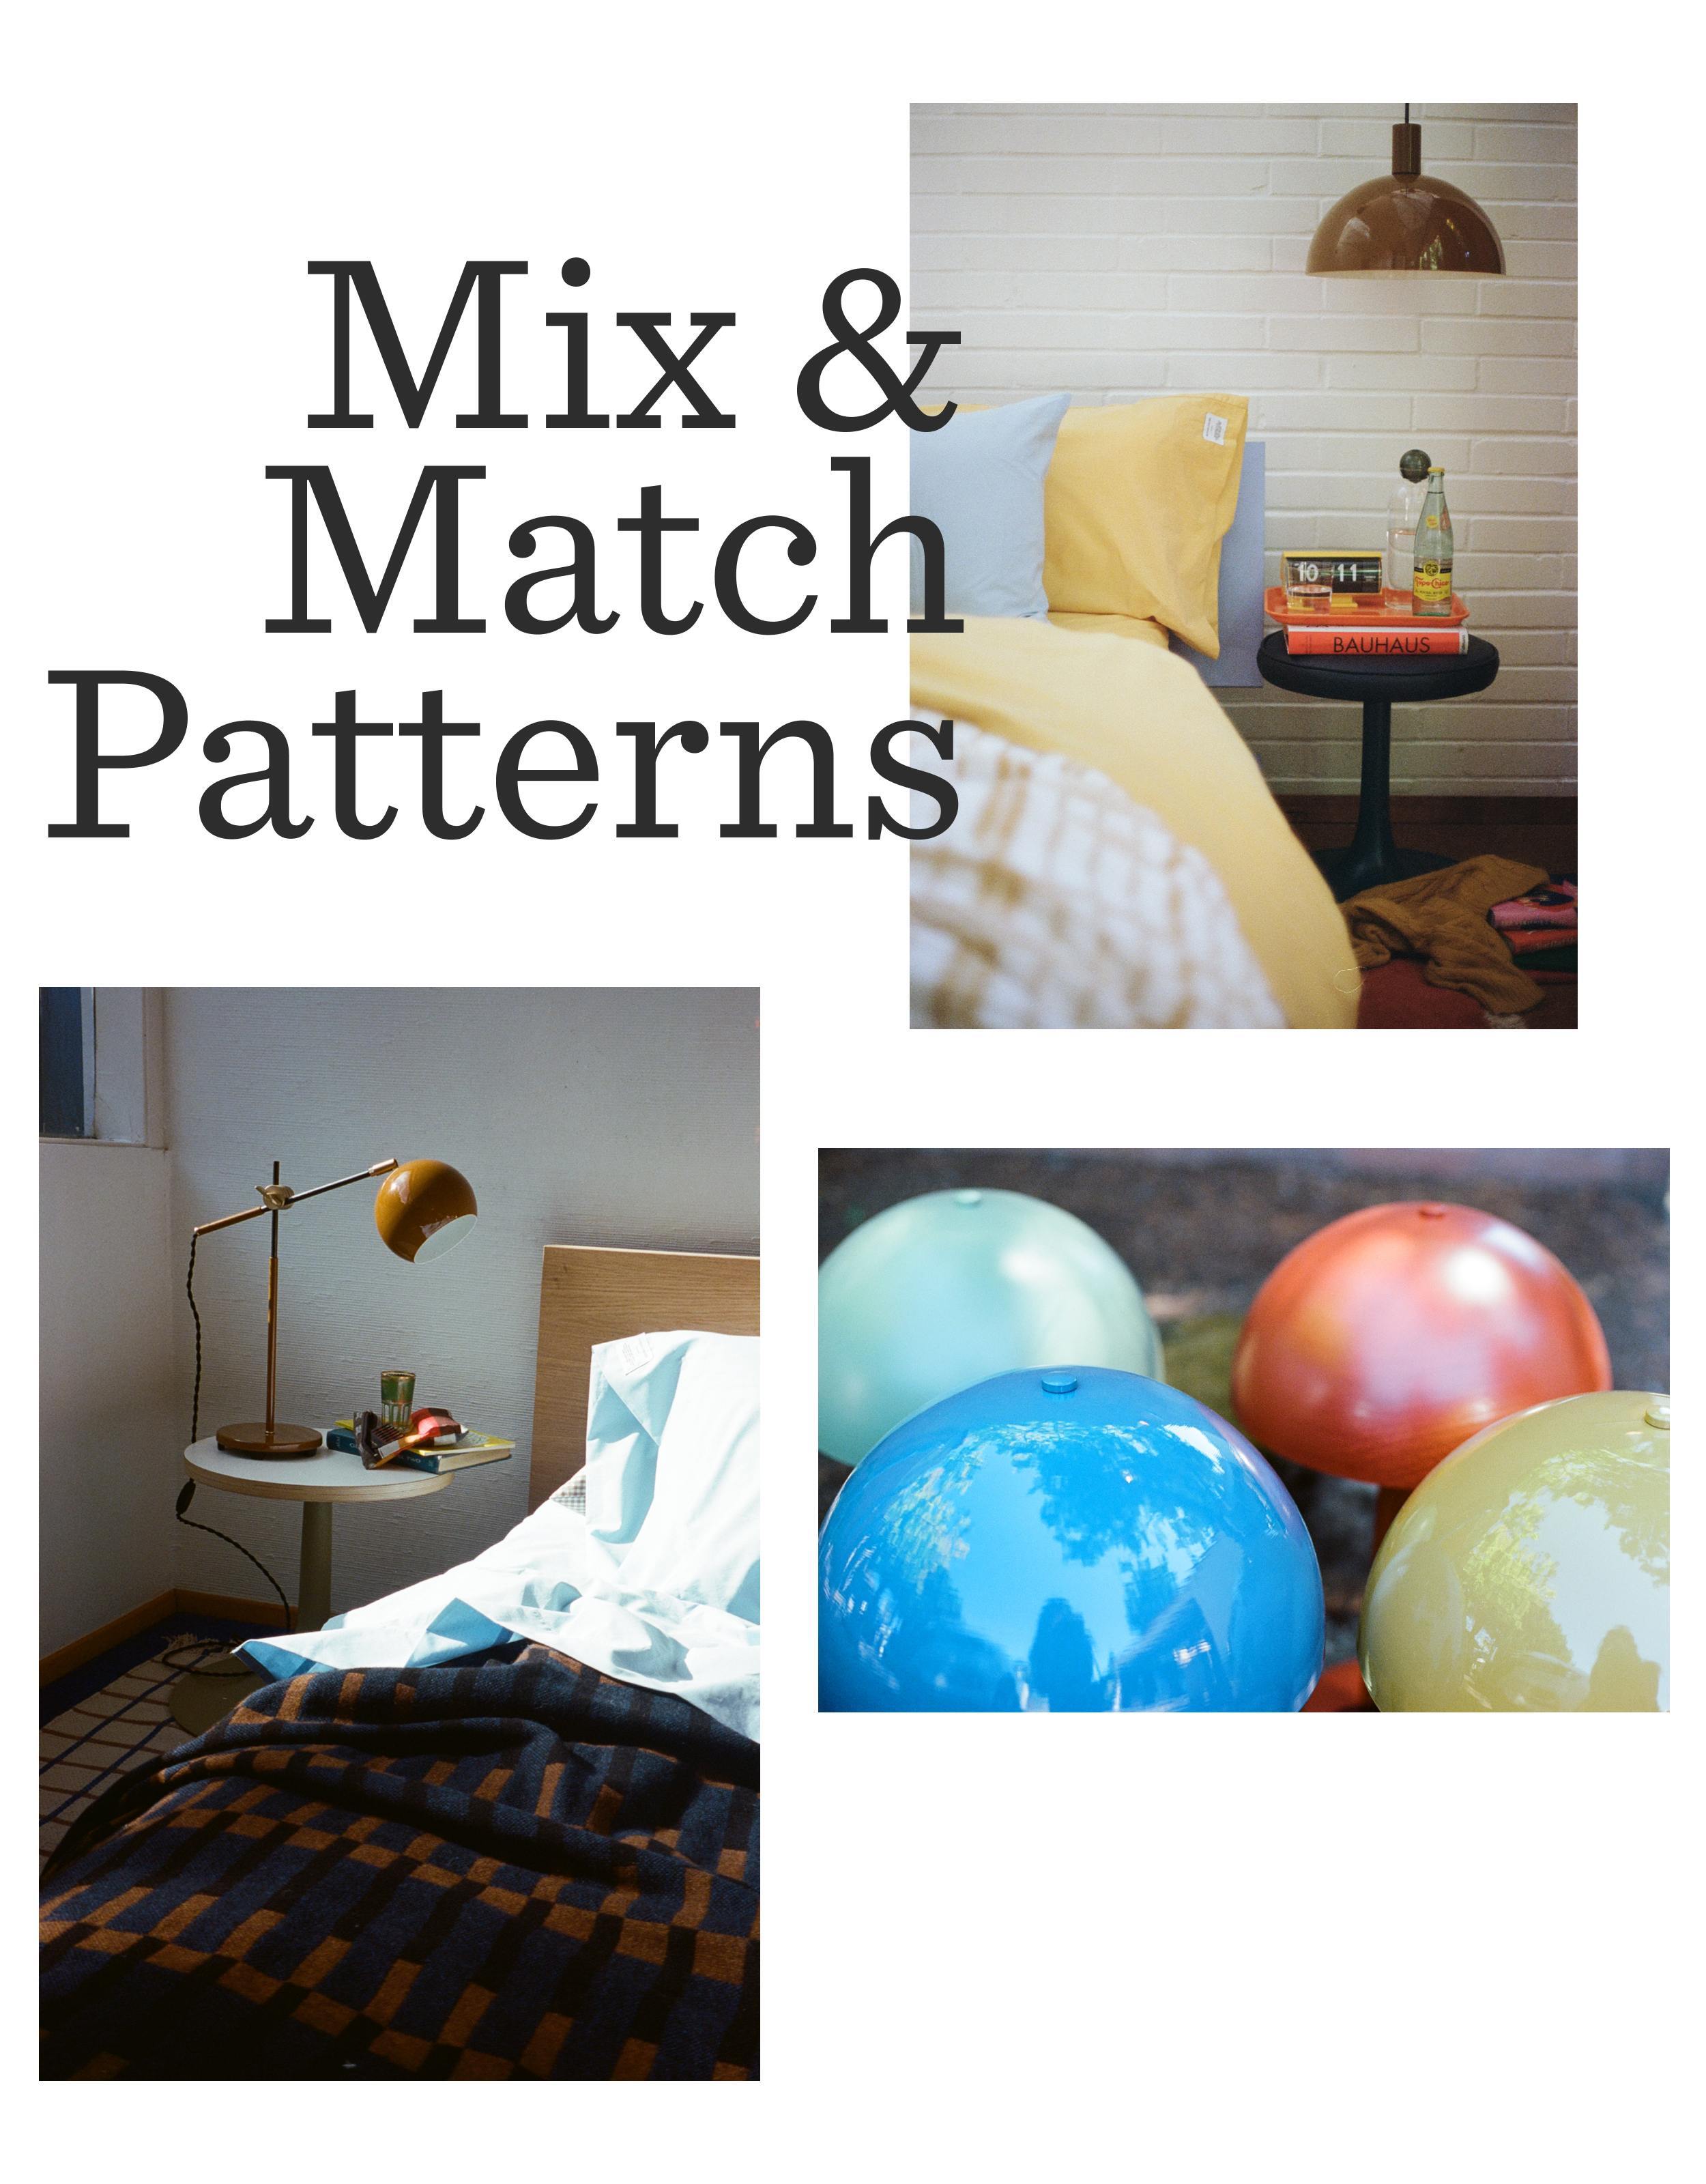 mood board for mixing and matching patterns in your home.